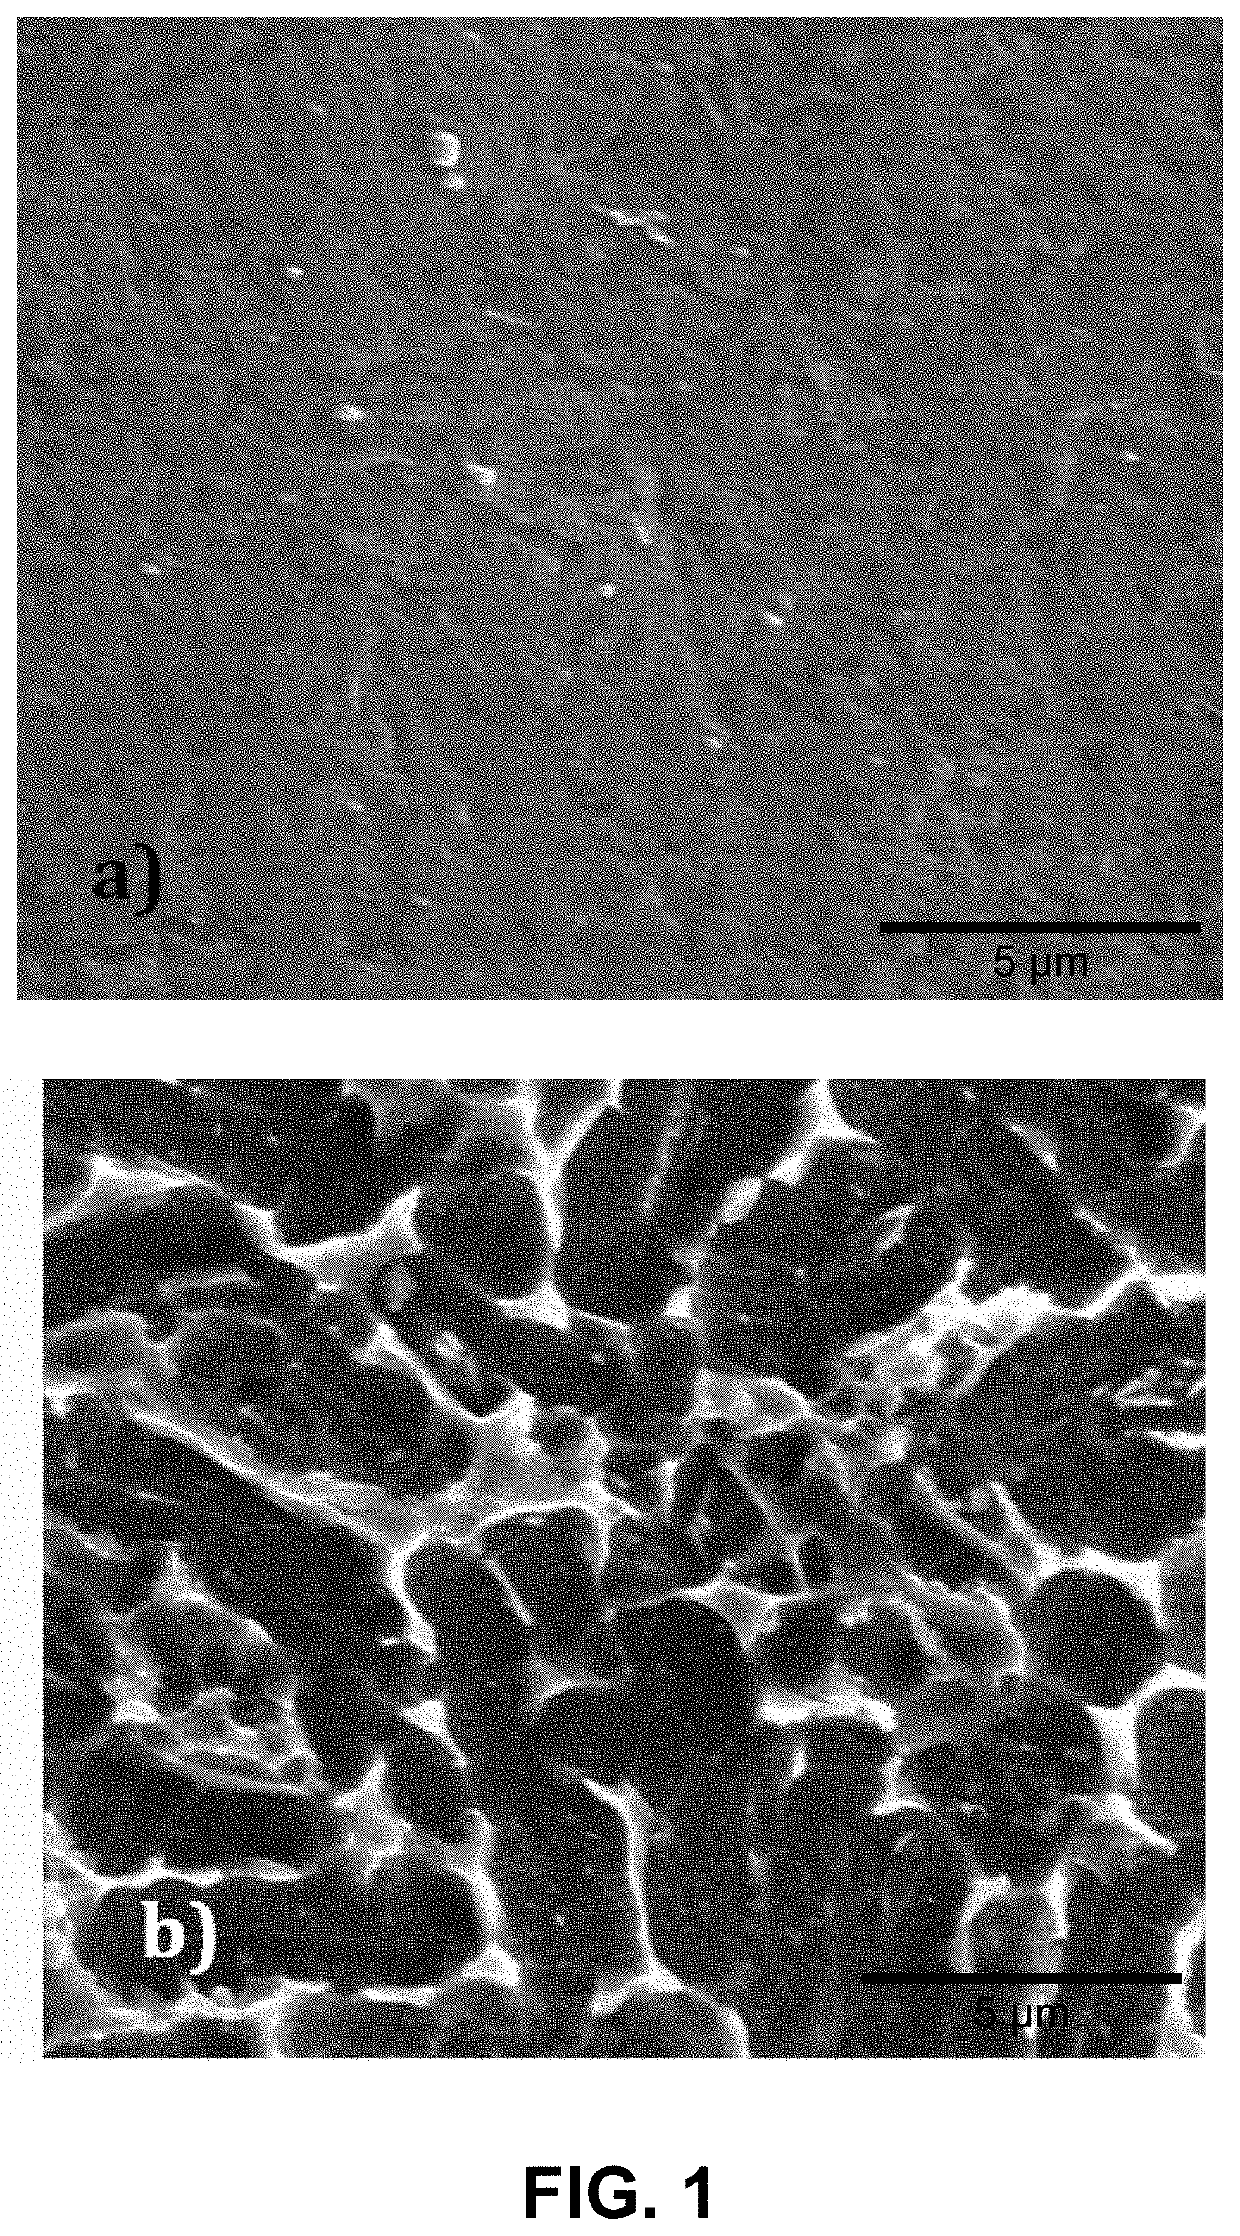 Nanostructured titanium-based compositions and methods to fabricate the same